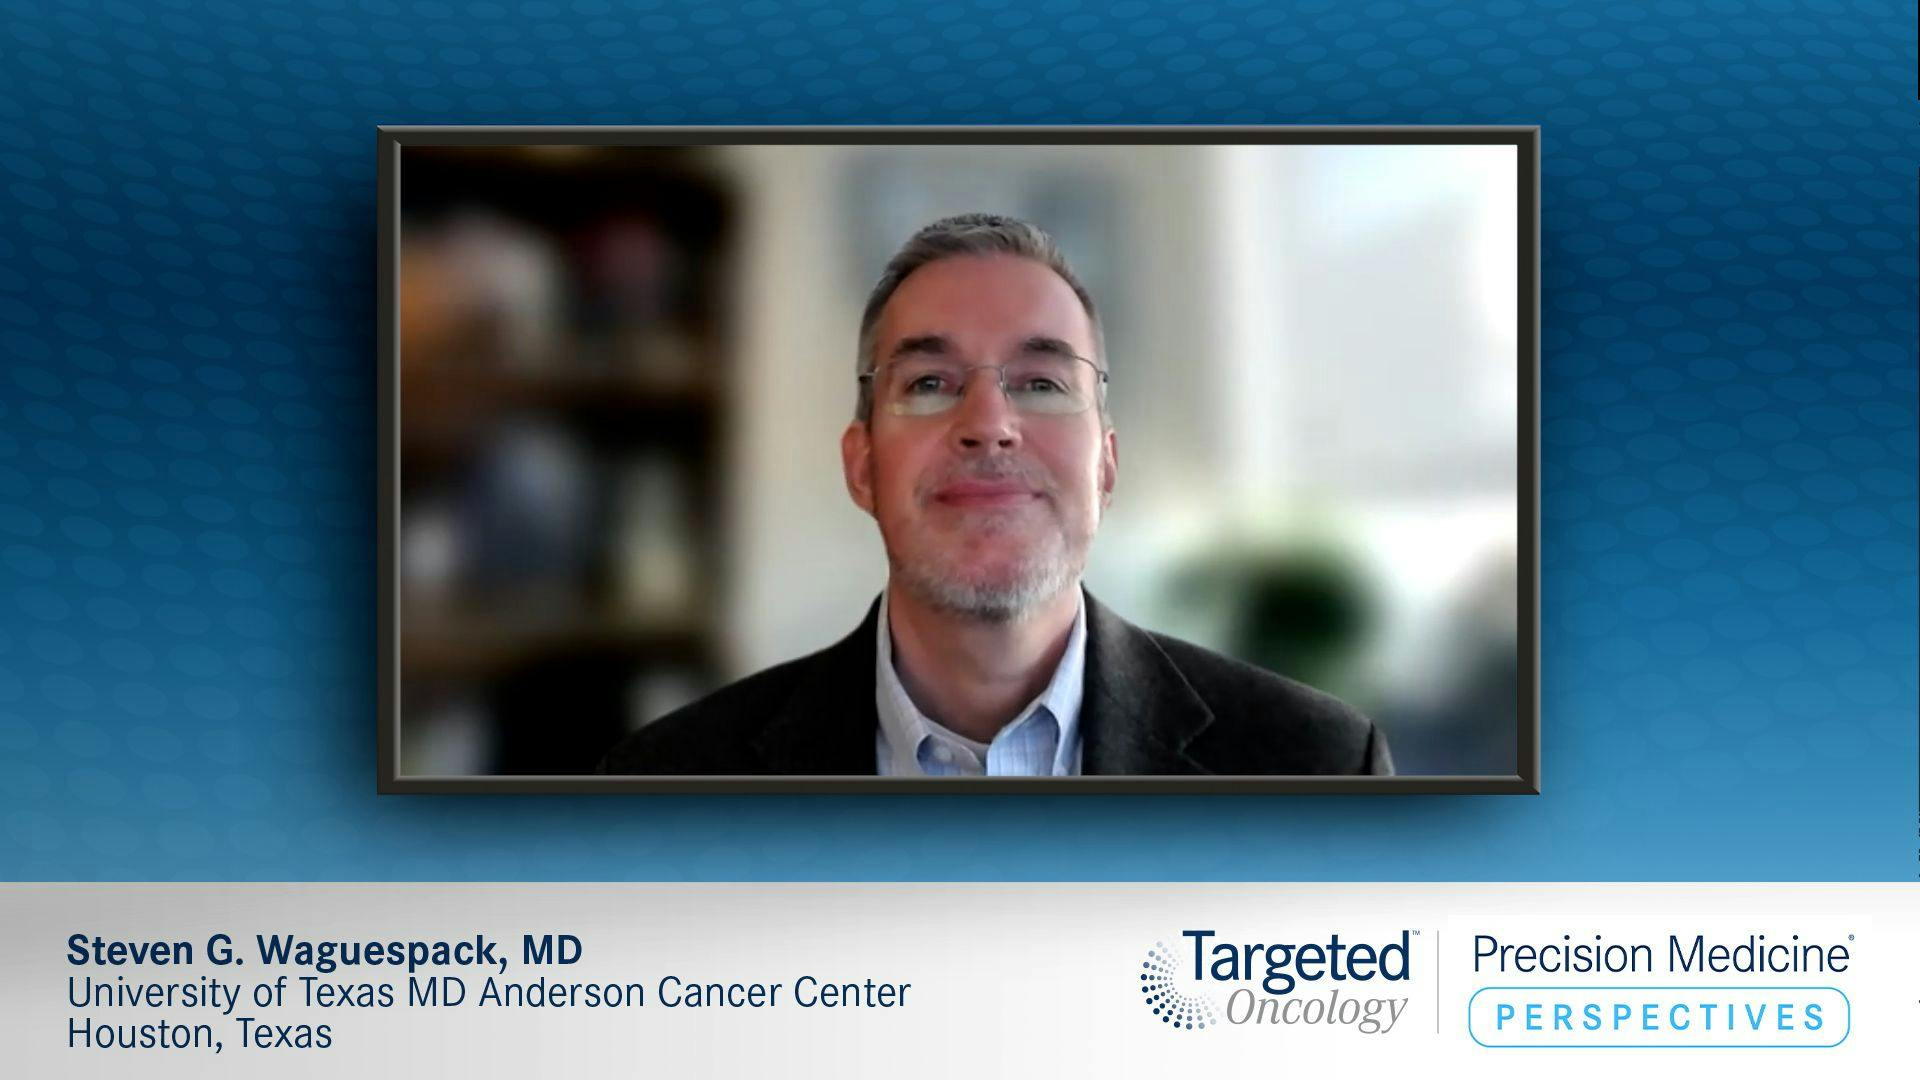 EP. 2A: The Effect of Larotrectinib on the Treatment Landscape for NTRK Fusion-positive Cancers